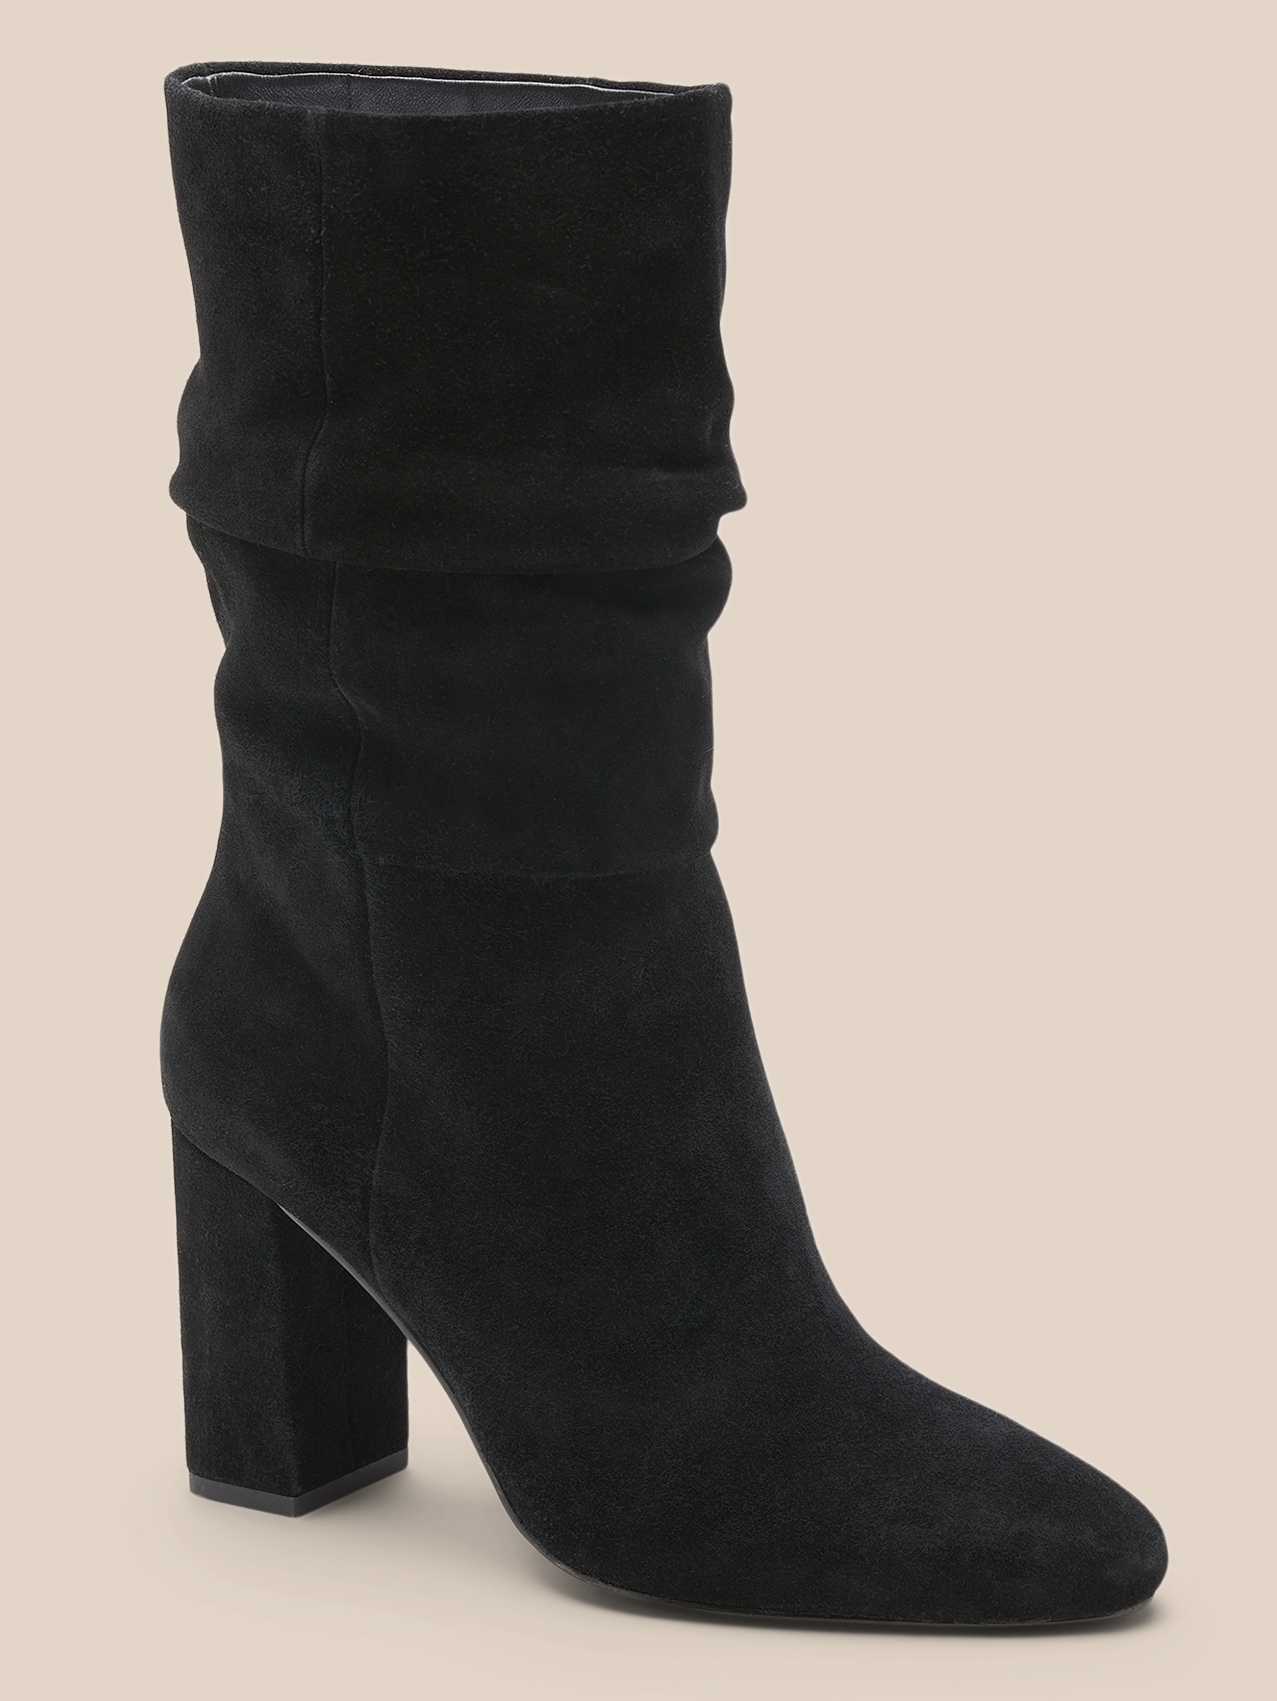 Midshaft Suede Slouchy Womens Boot (Black)